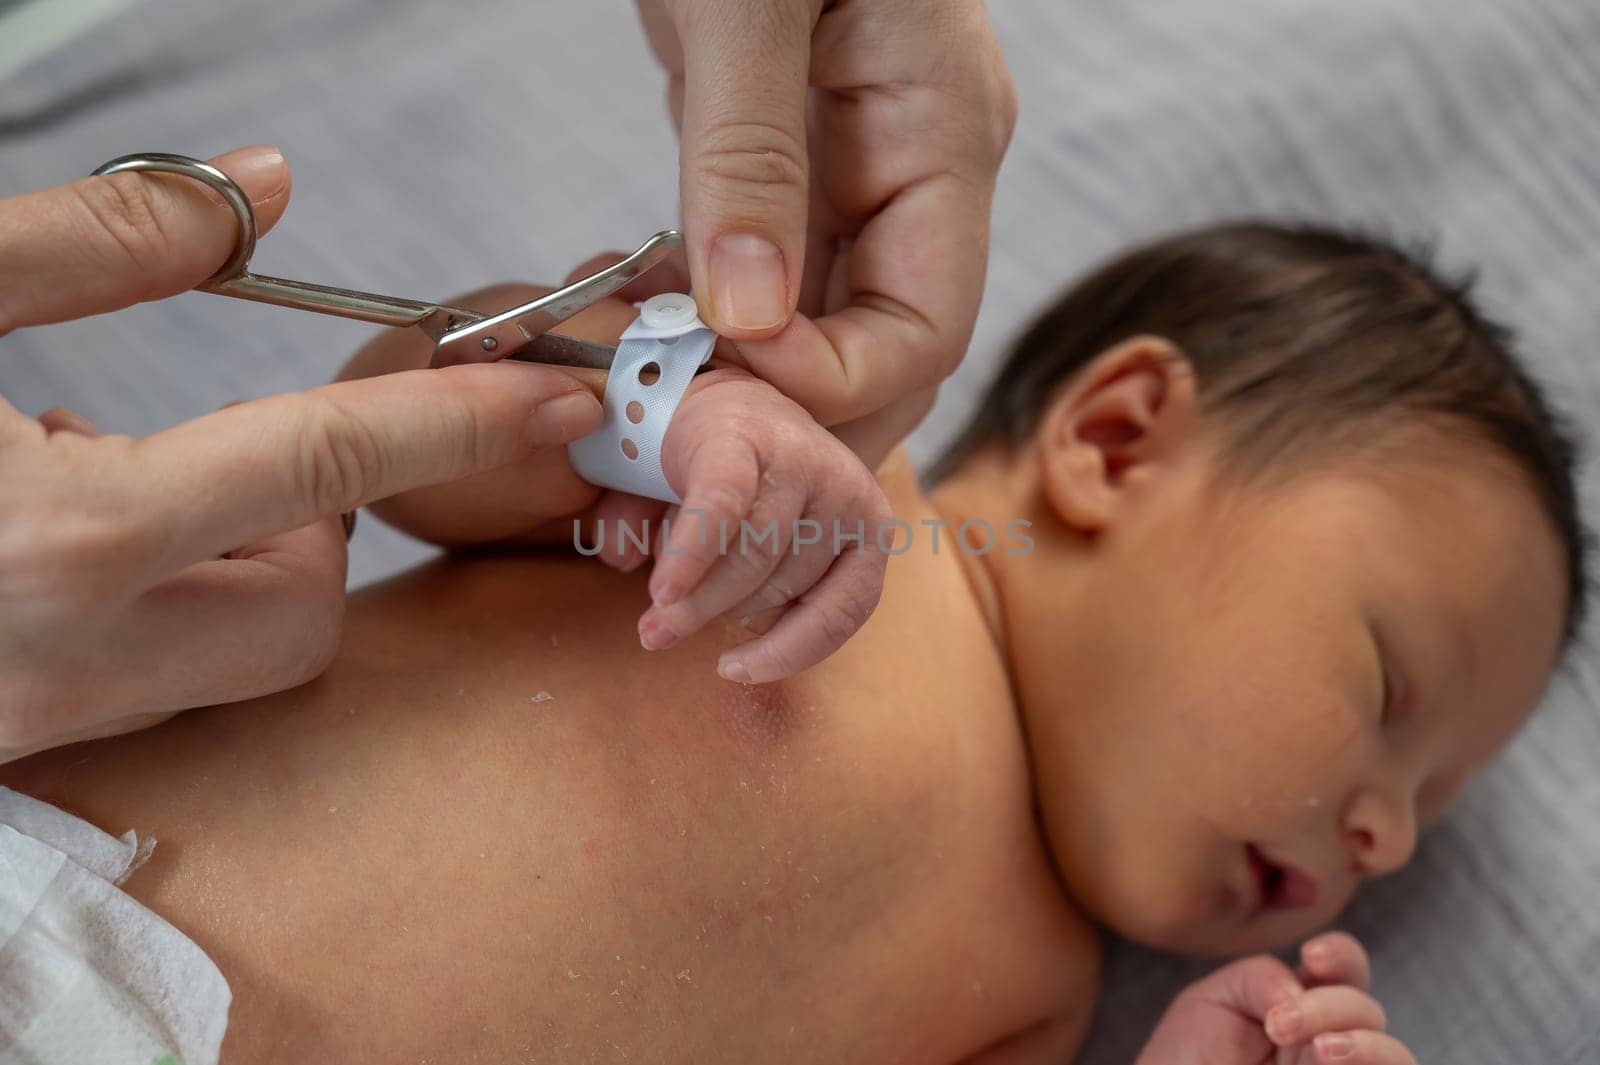 A woman cuts a tag from a newborn boy's hand with nail scissors. Close-up of hands. by mrwed54